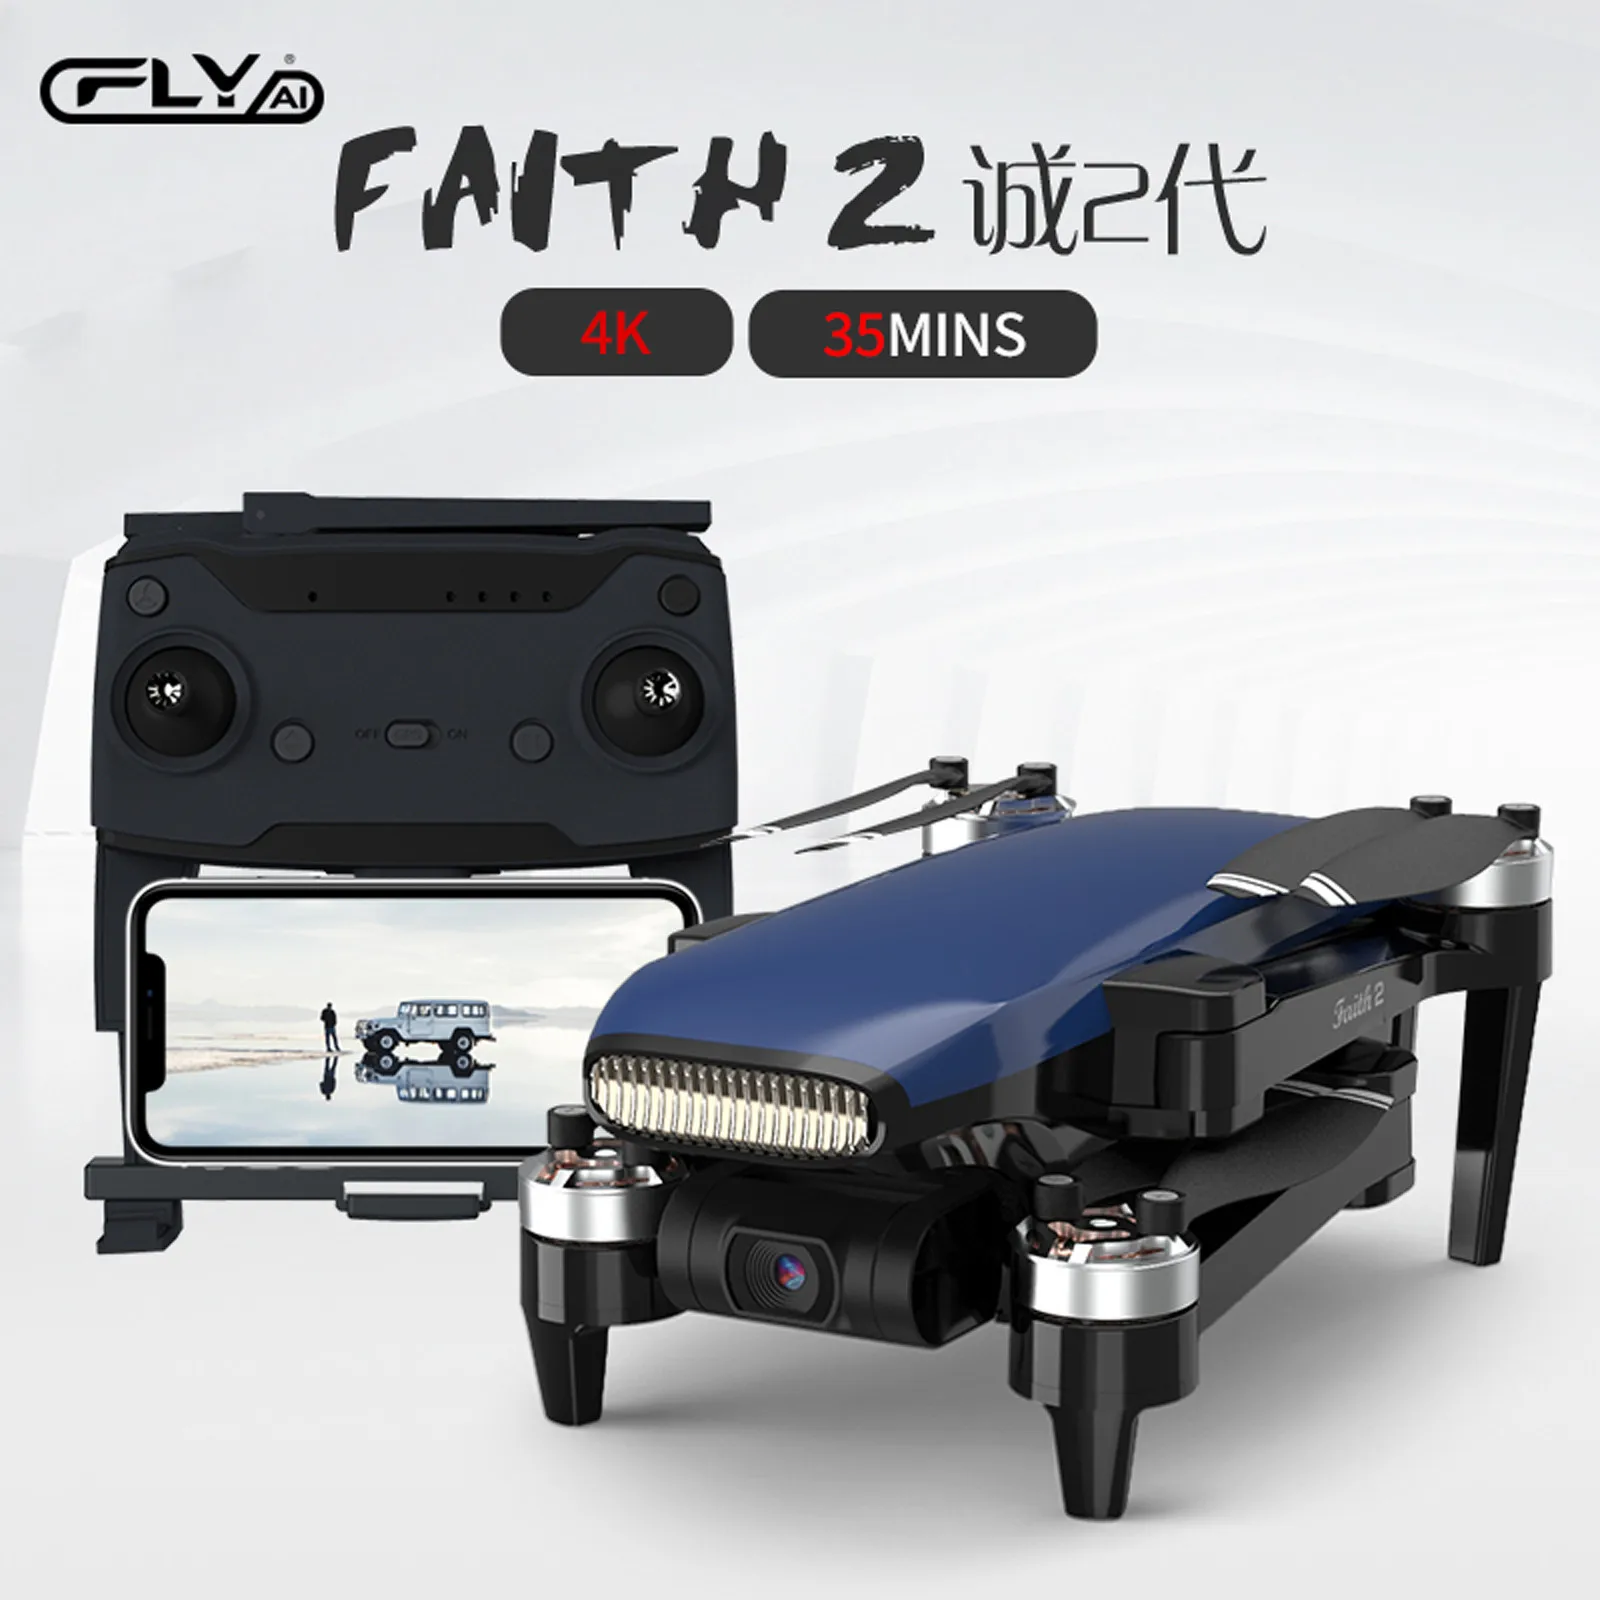 

Faith2 5g Wifi 5km Fpv Gps With 4k Hd Camera 3-axis Stable Gimbal 35 Mins Flight Time Rc Drone Quadcopter Rtf